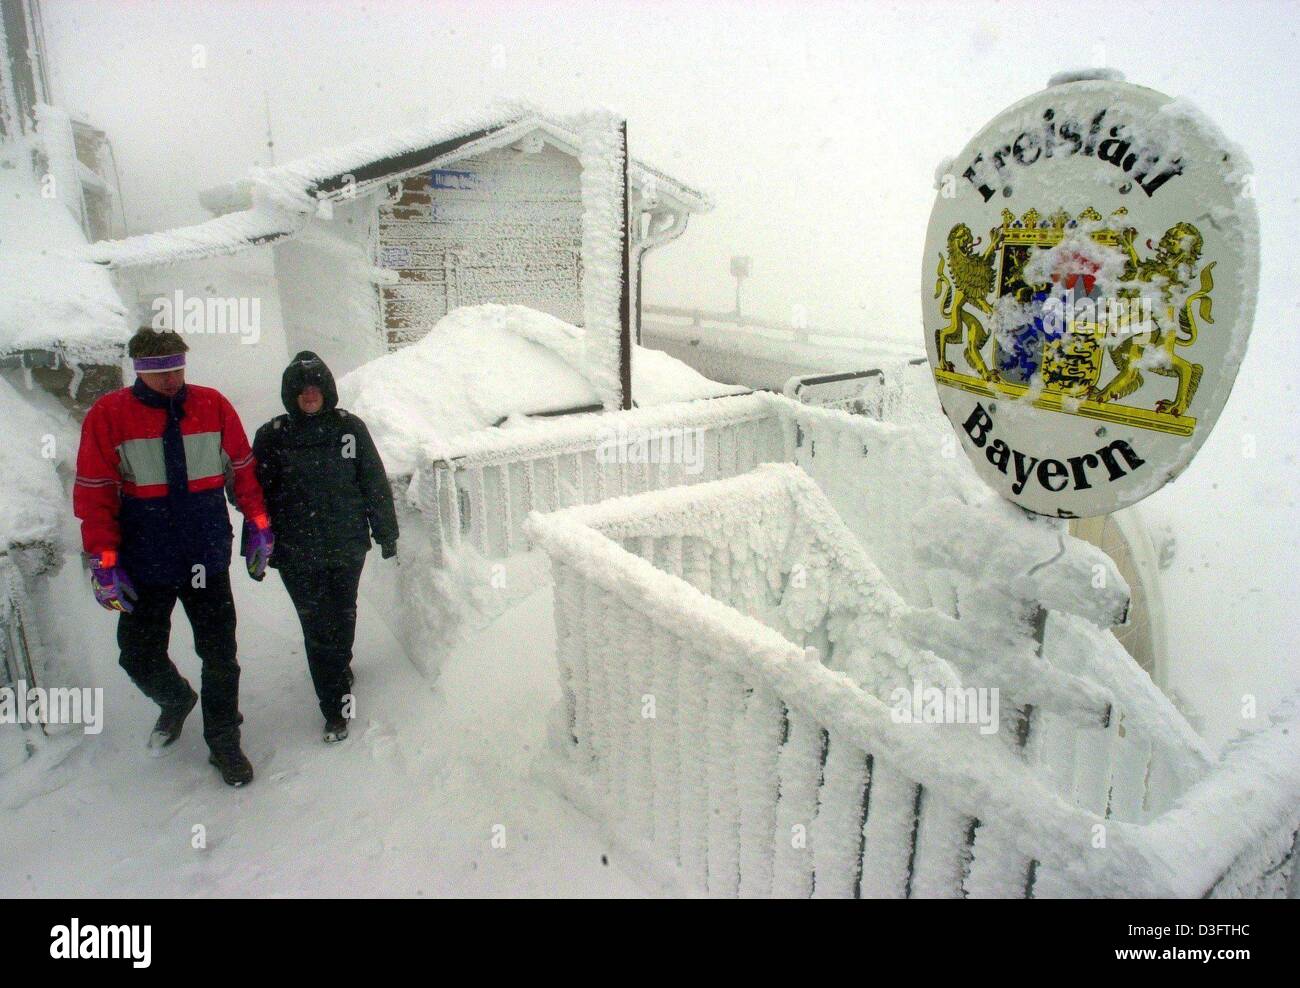 (dpa files) - Hikers walk up the snowcovered steps to the viewpoint on the peak of the Zugspitze Mountain near Garmisch-Partenkirchen, Germany, 11 September 2001. The signpost on the right reads 'Freistaat Bayern' (free state of Bavaria) and marks the borderline between Germany (Bavaria) and Austria. Stock Photo